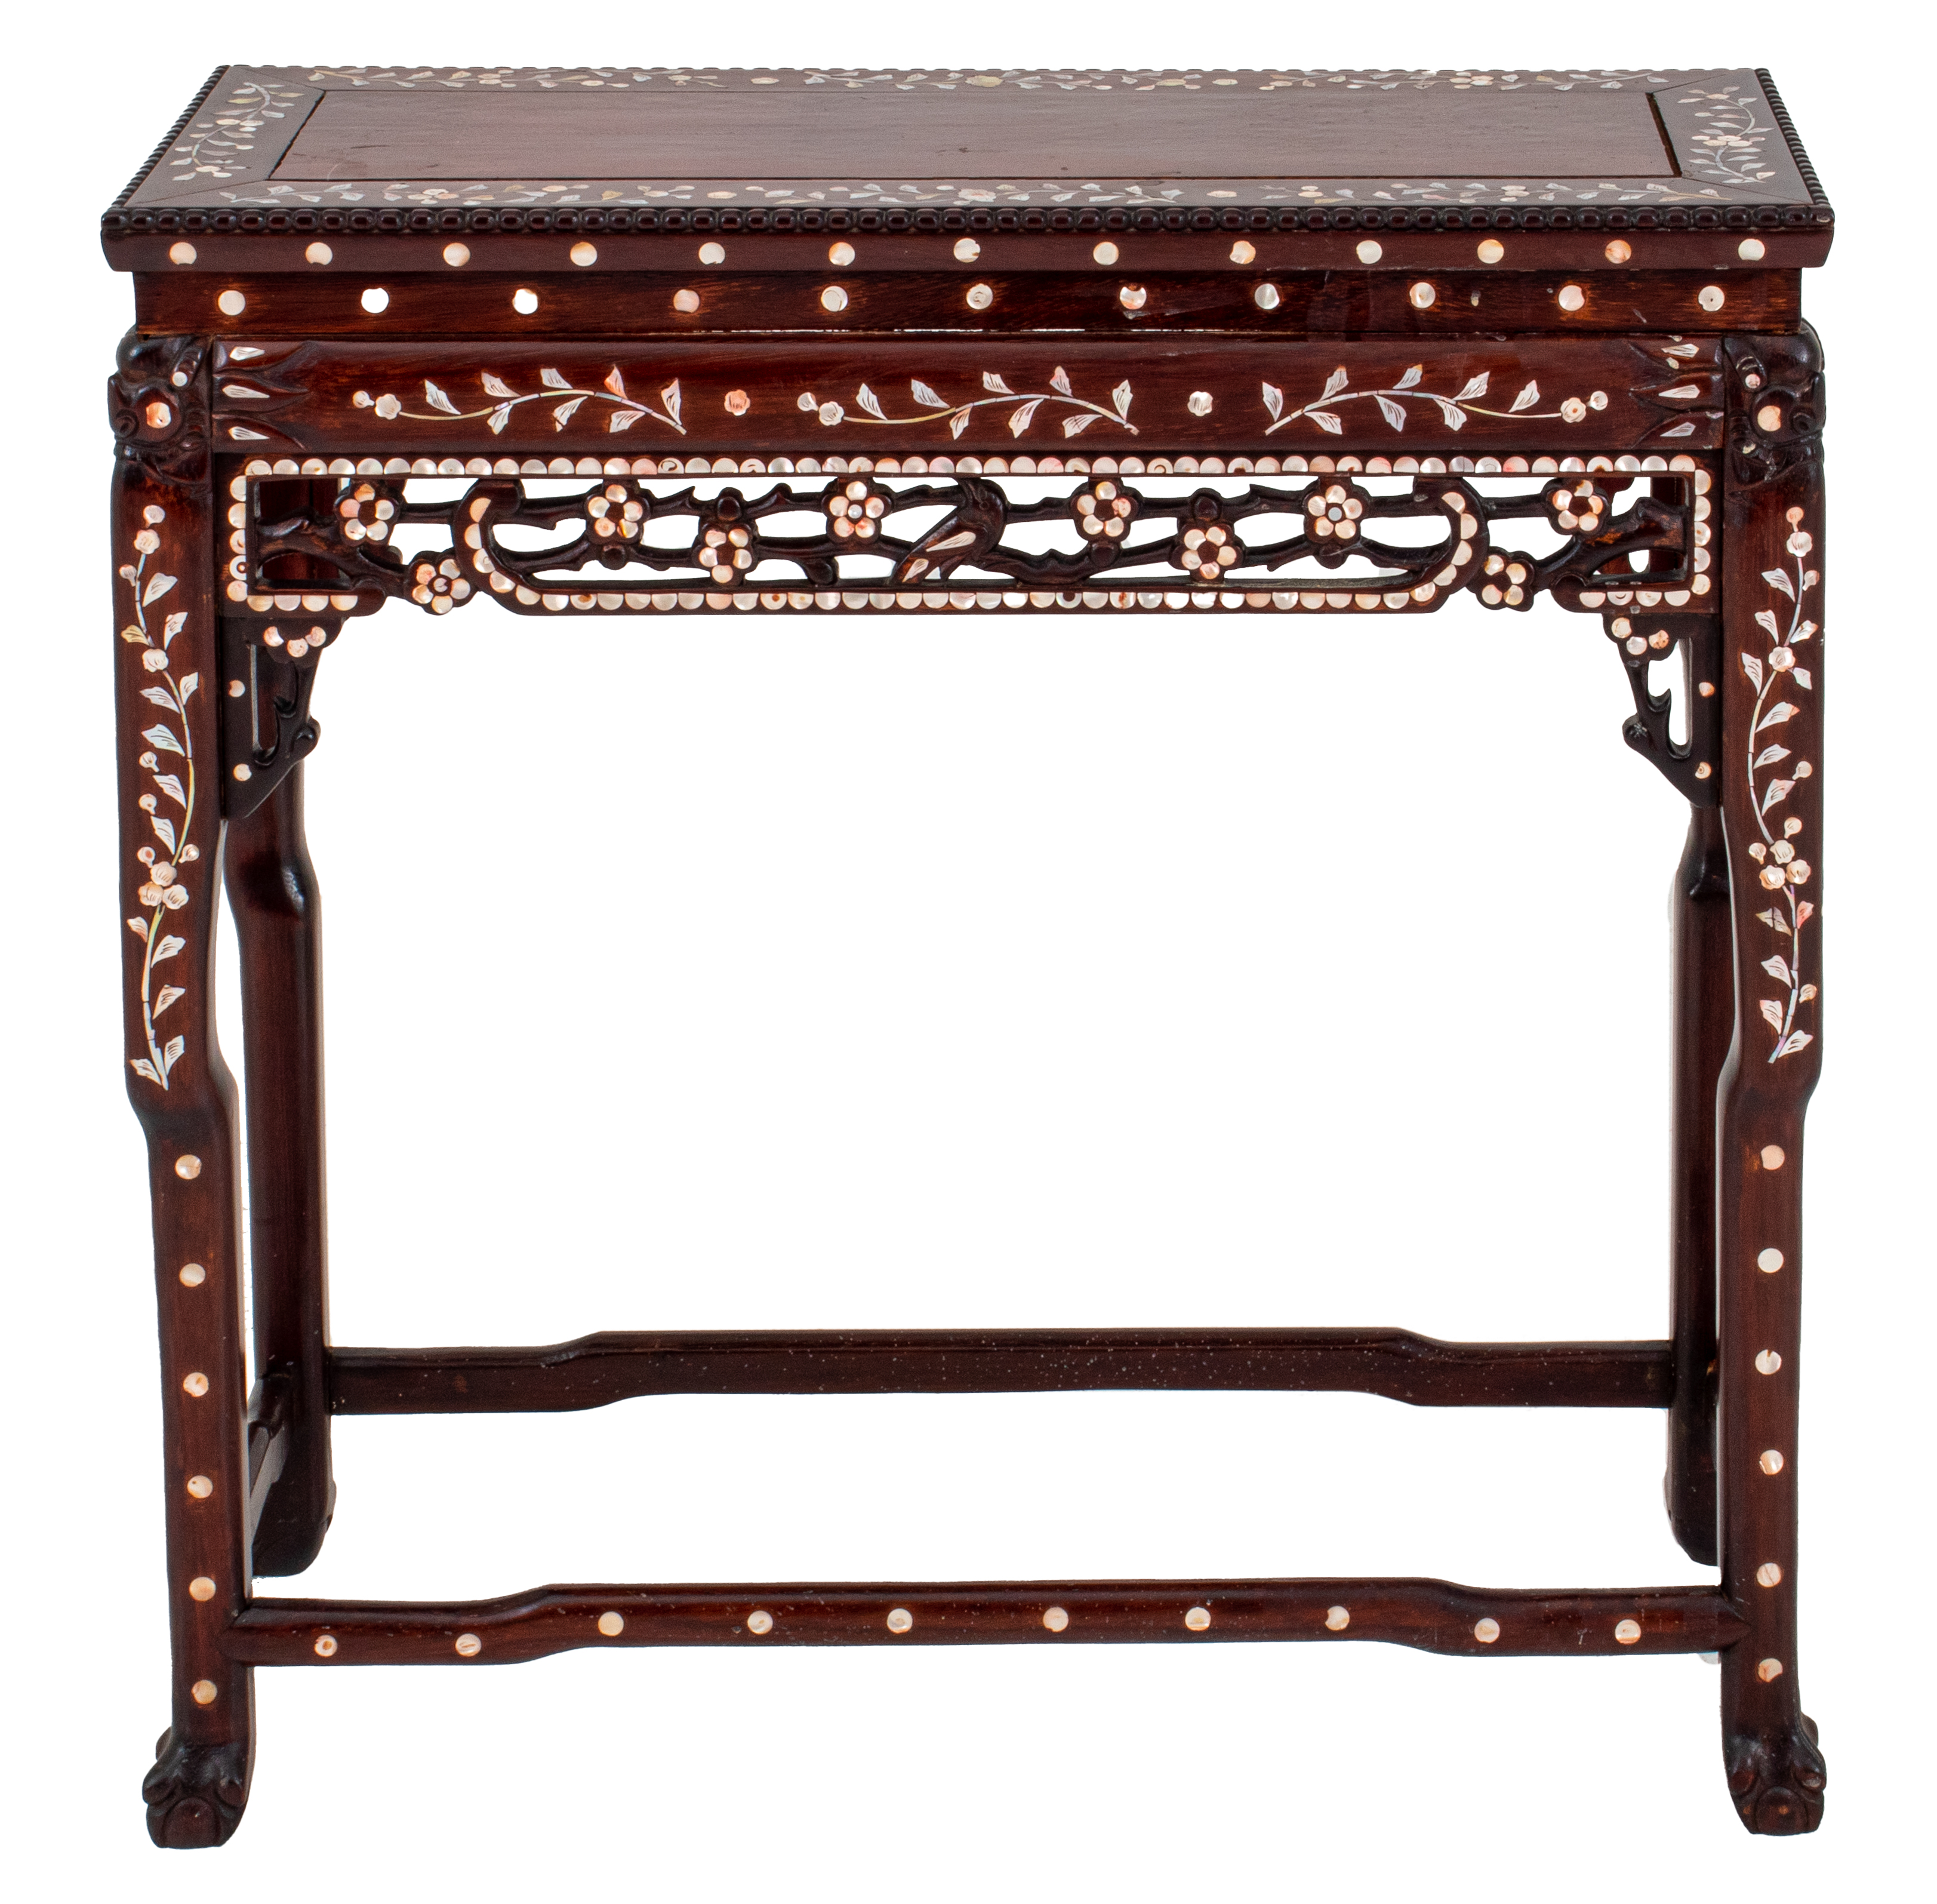 CHINESE ABALONE INLAID ALTAR TABLE 2be3d4